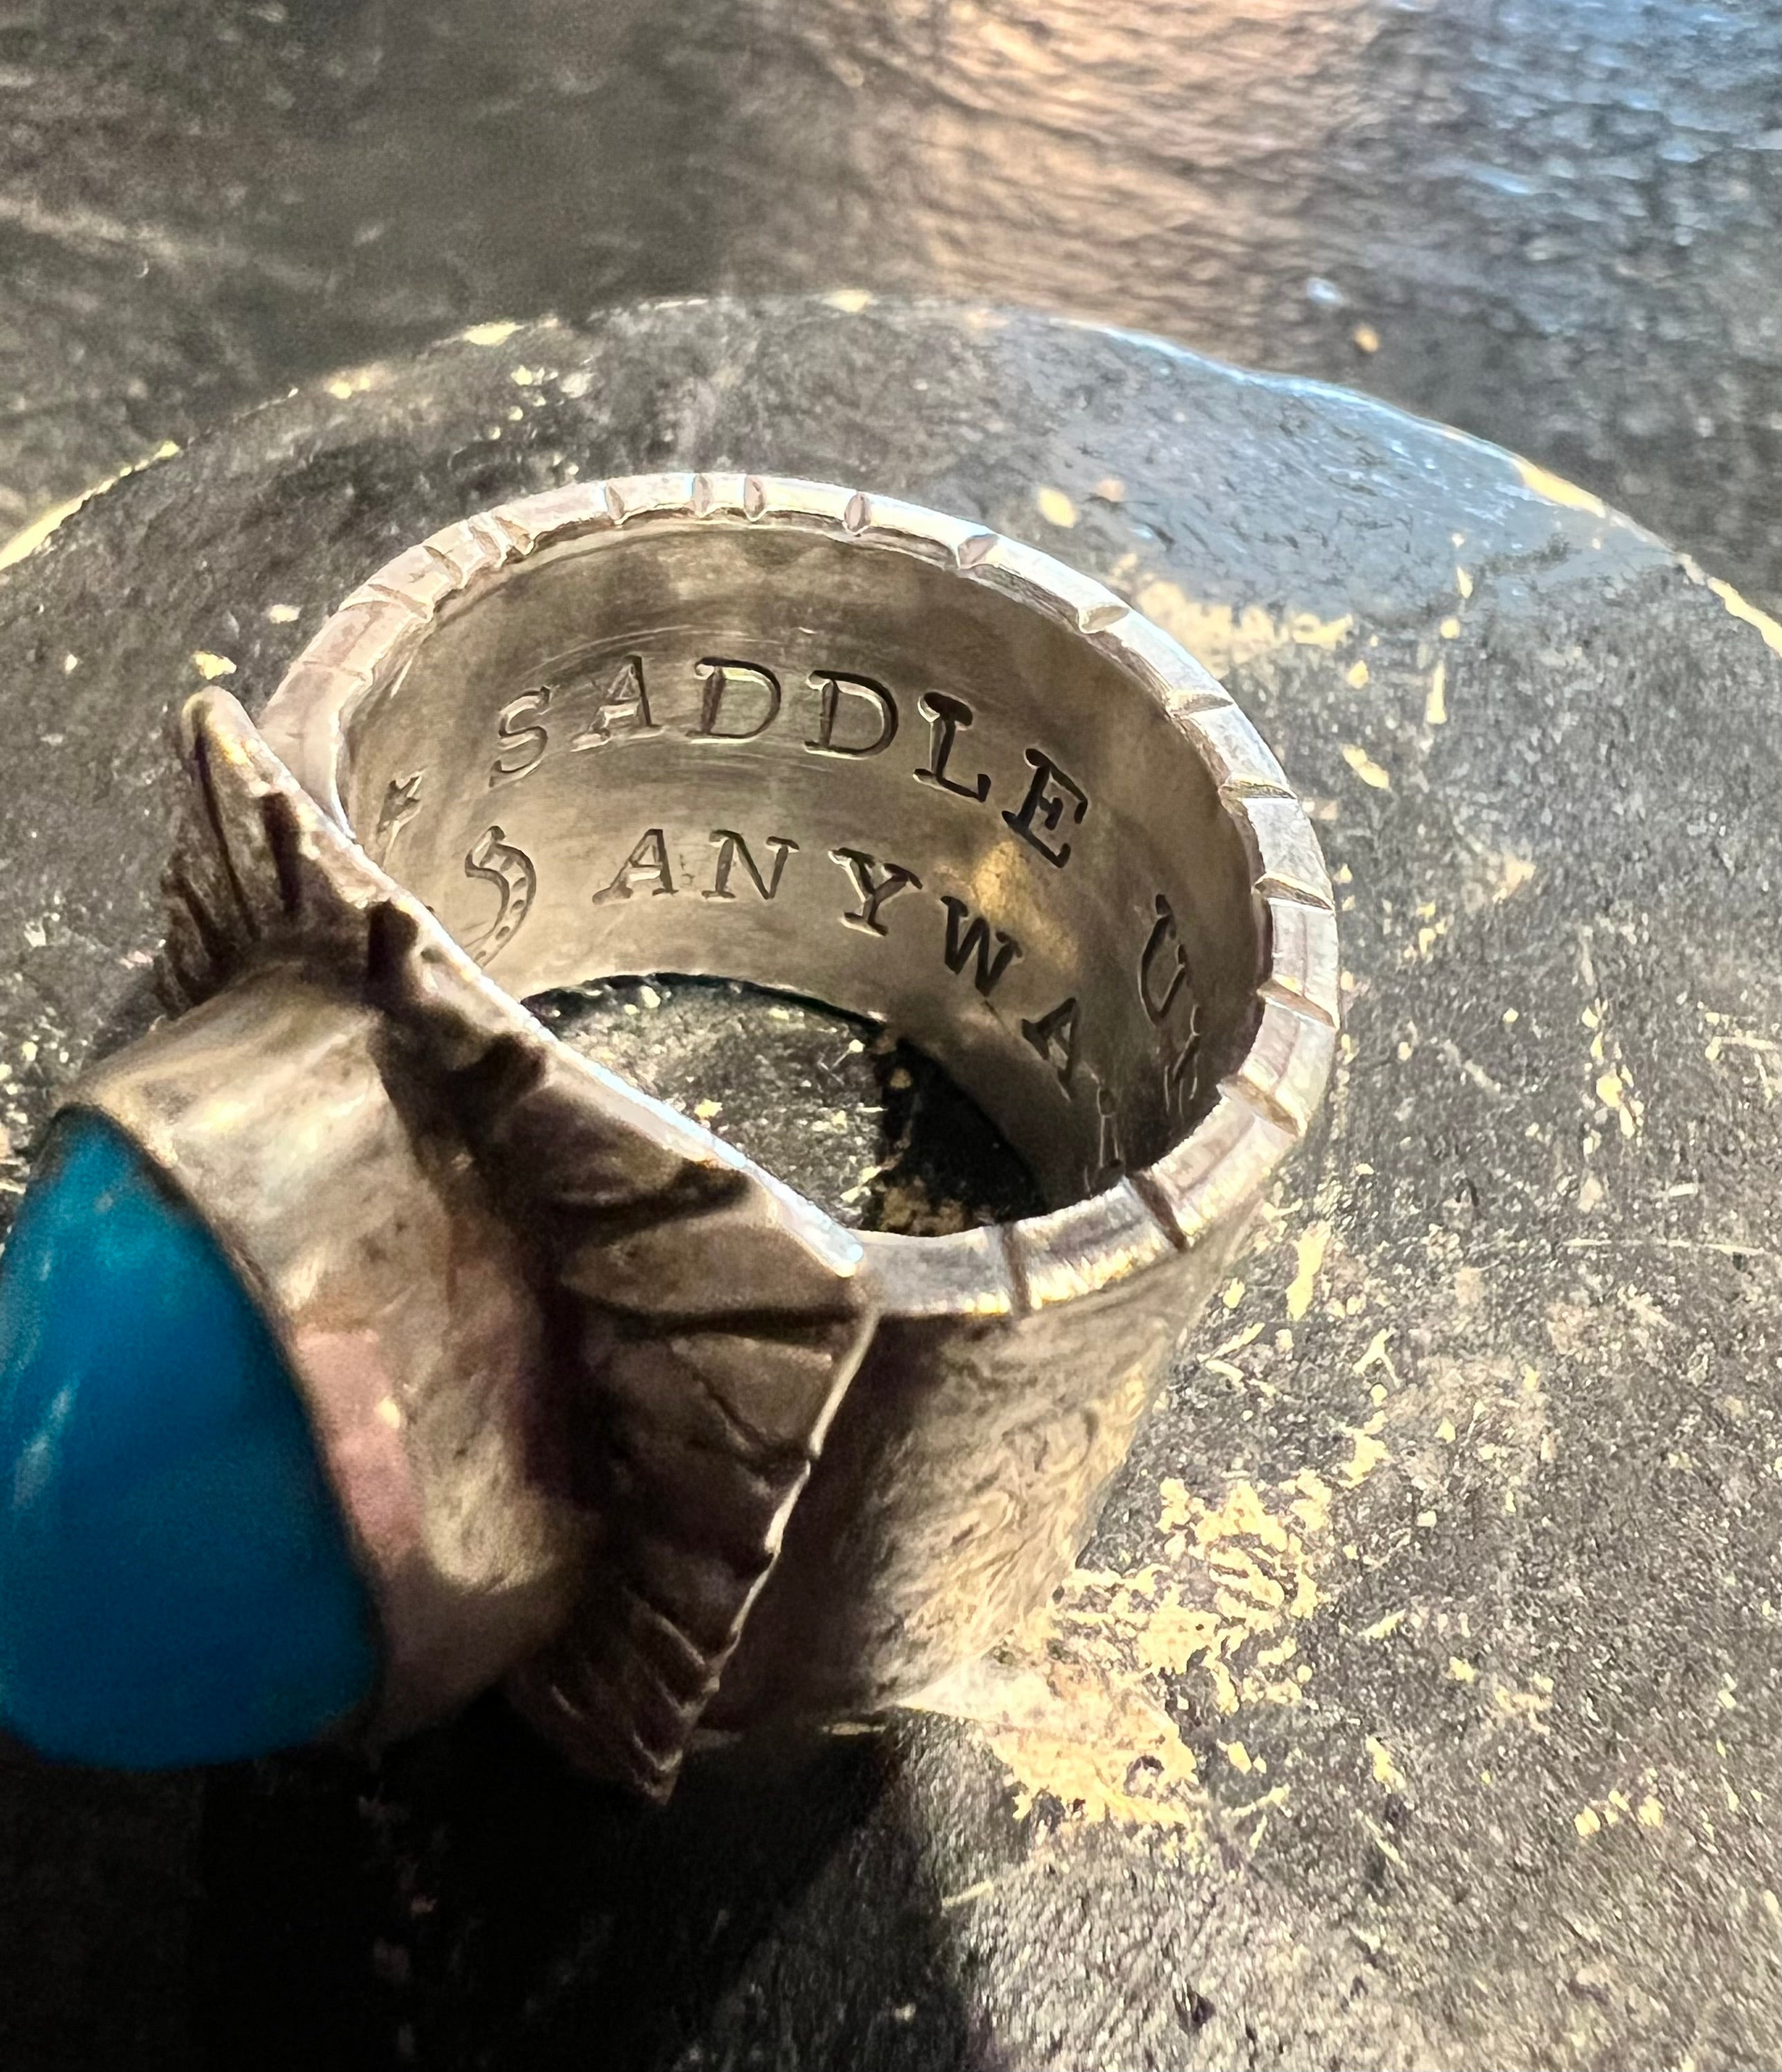 One of Kind Handmade Sterling and Turquoise Ring